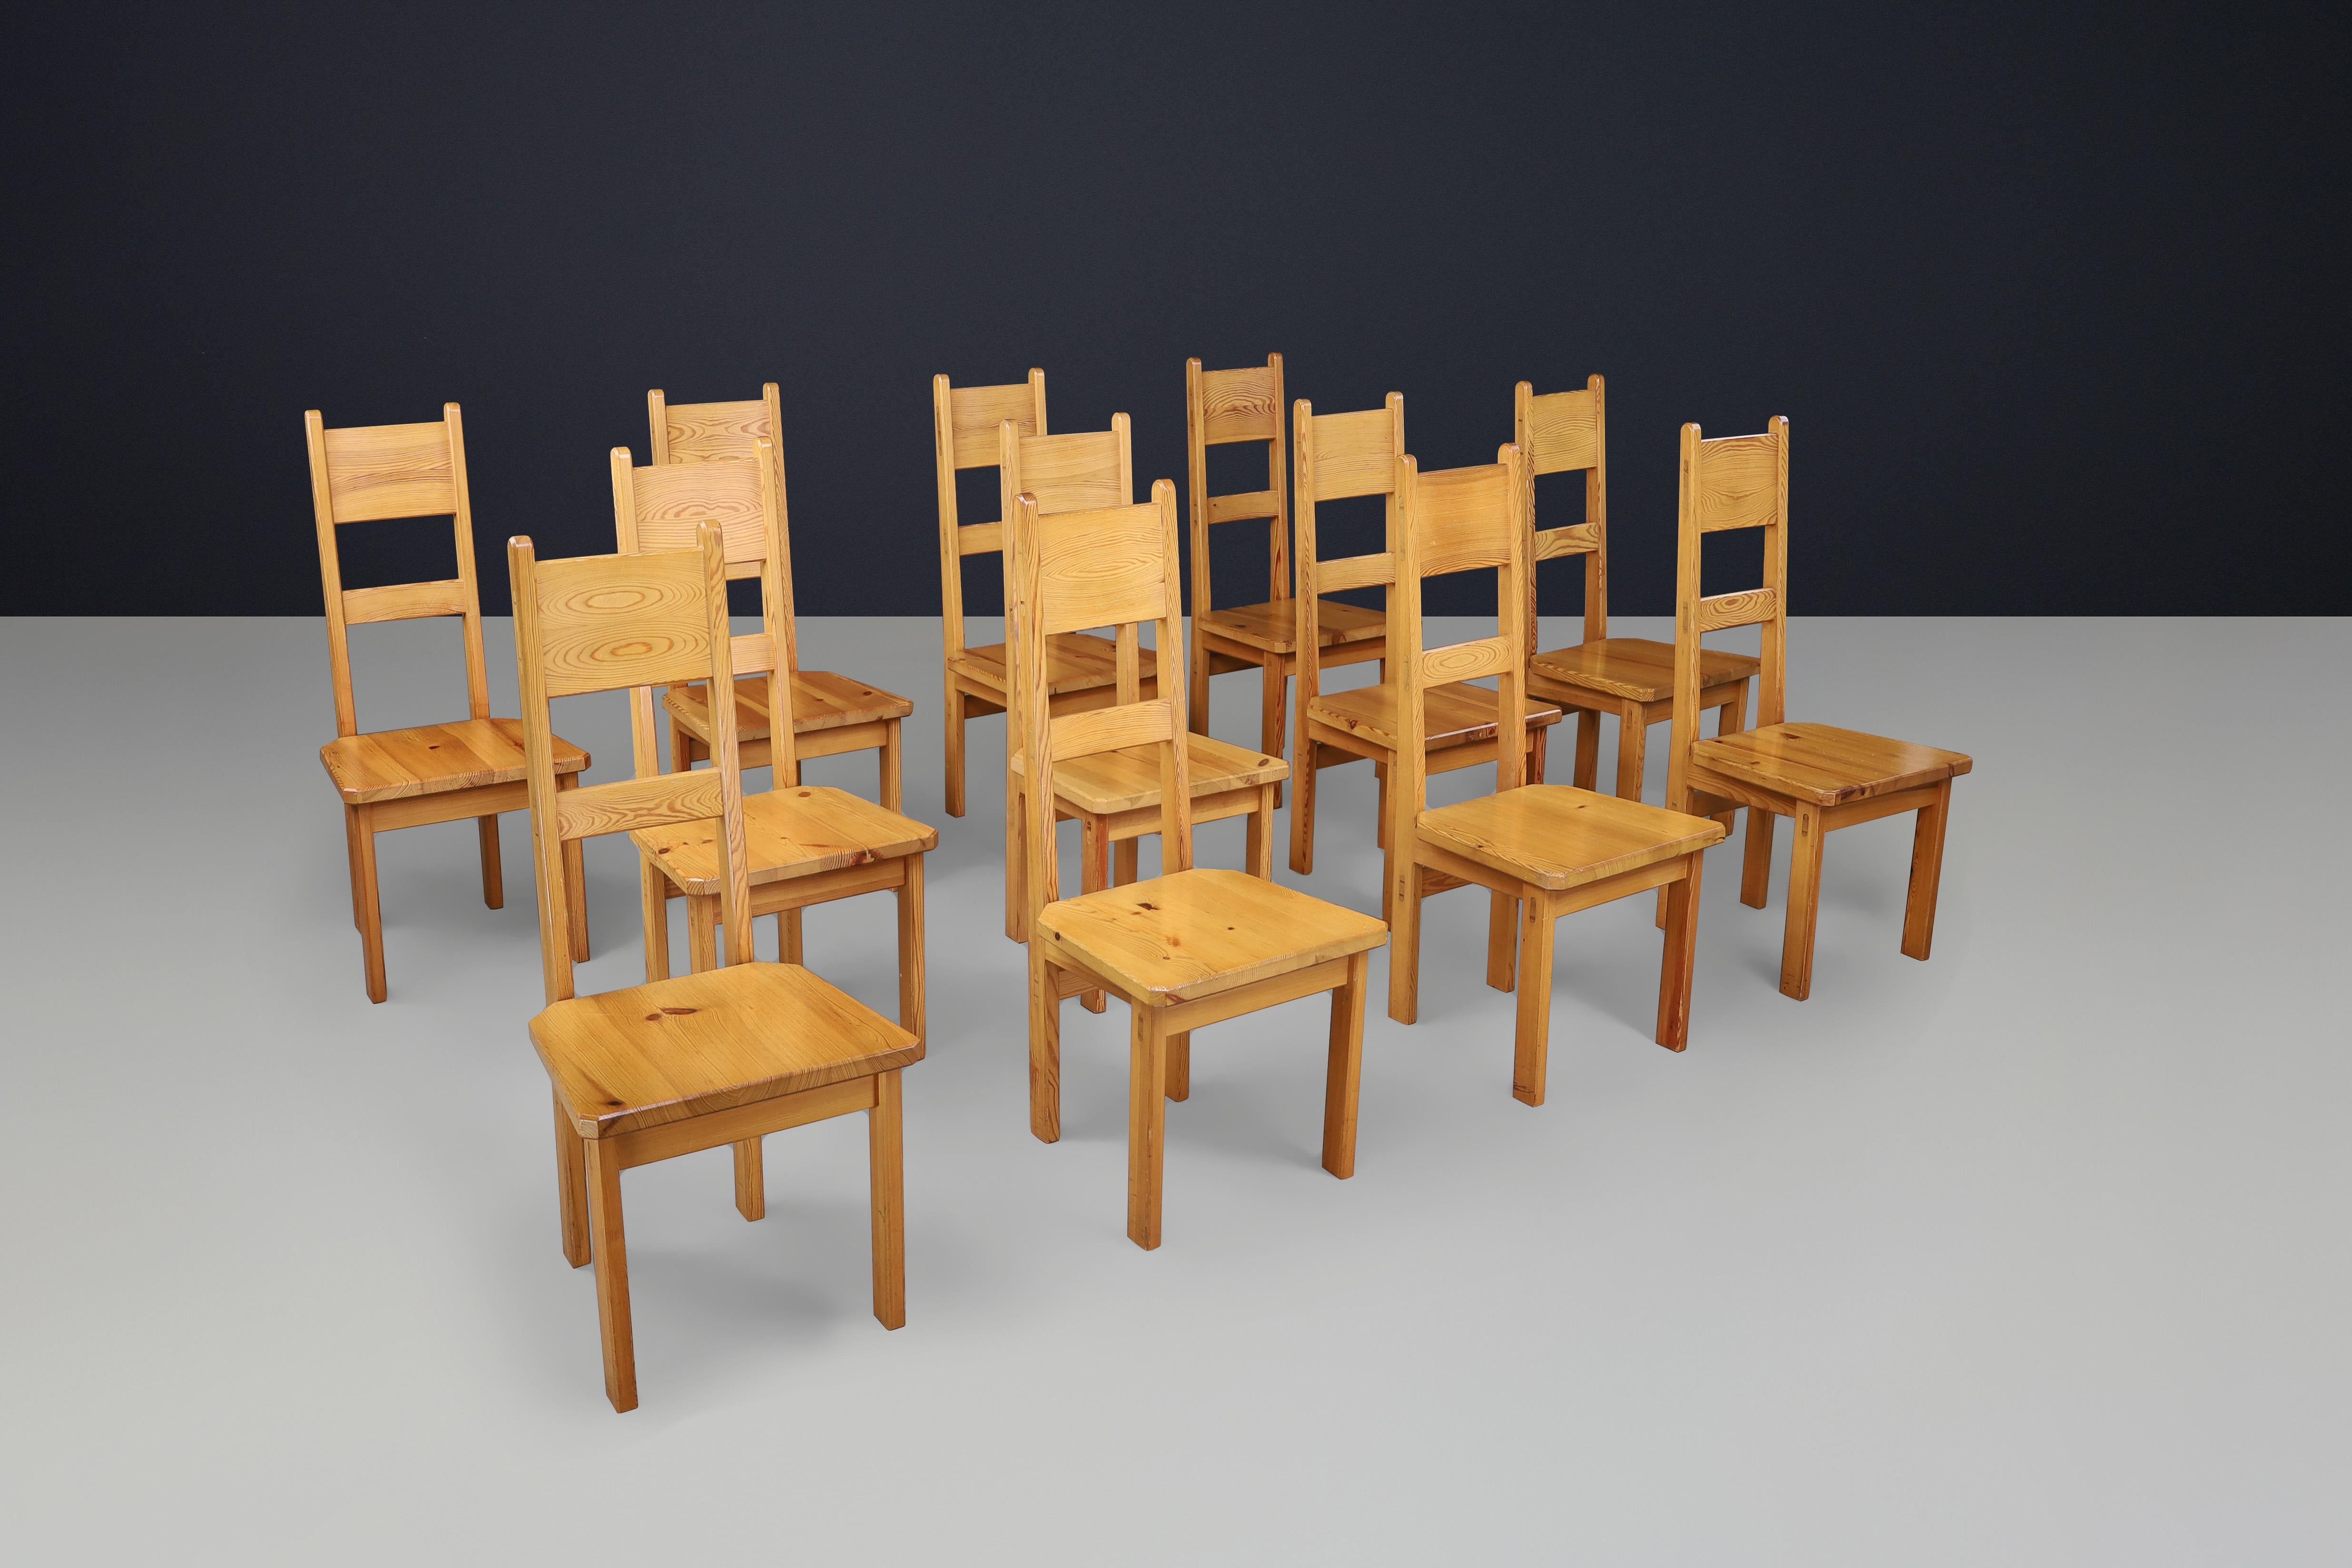 Set of twelve Roland Wilhelmsson for Karl Andersson & Söner Solid Pine Wood Chairs Sweden 1970s

These are a set of twelve solid pine chairs designed in the 1960s by Roland Wilhelmsson and manufactured by Karl Andersson & Söner. The chairs have